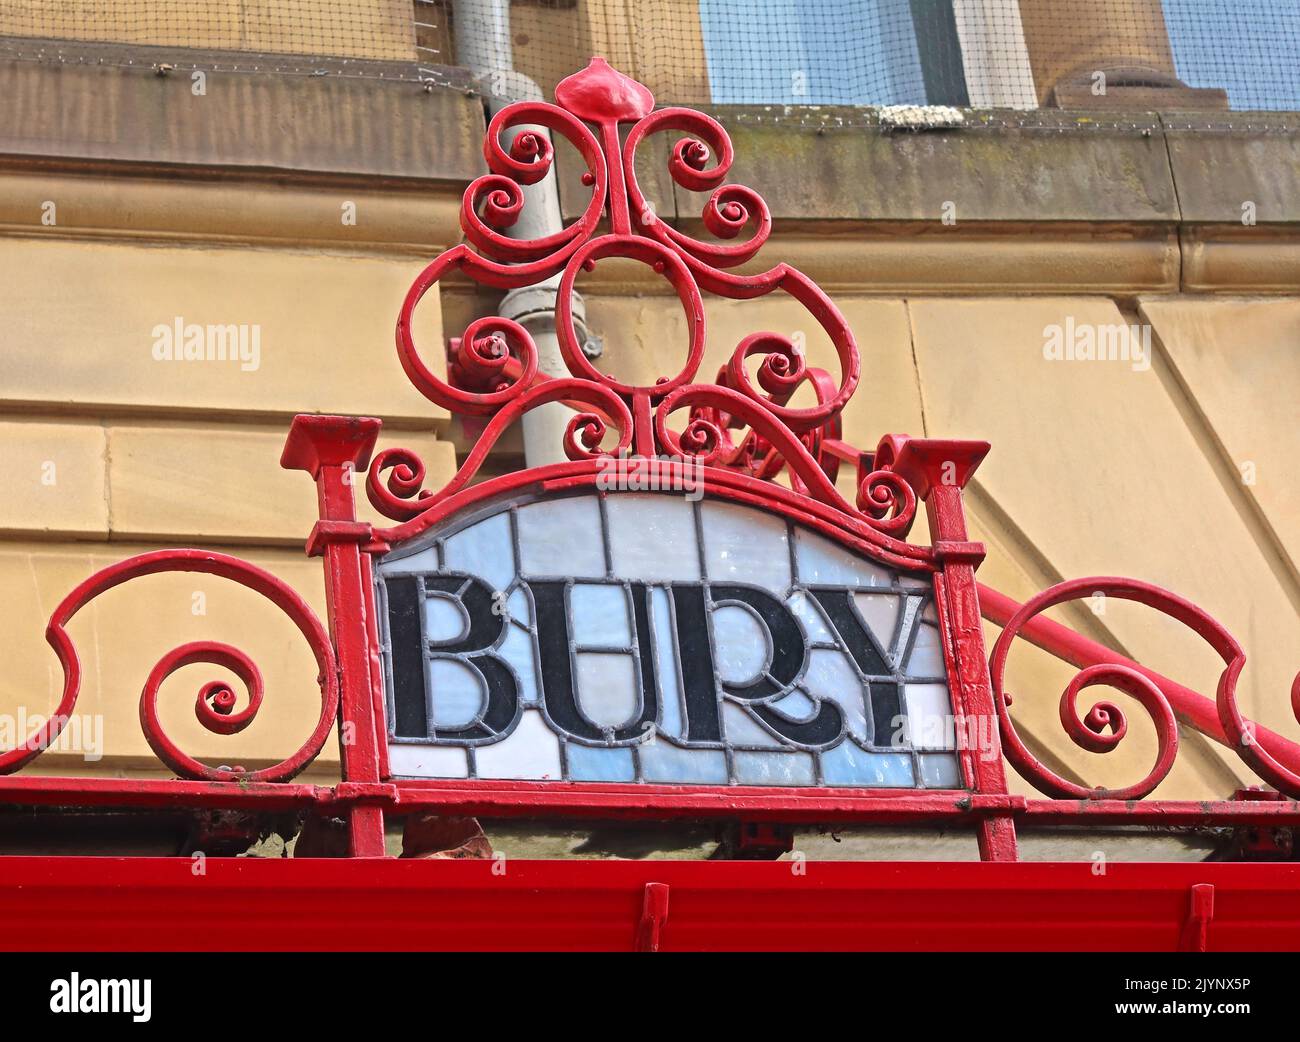 Bury - Art Nouveau, lettering,words showing M&LR and L&YR destination on ornate glass & iron canopy, Manchester Victoria railway station Stock Photo